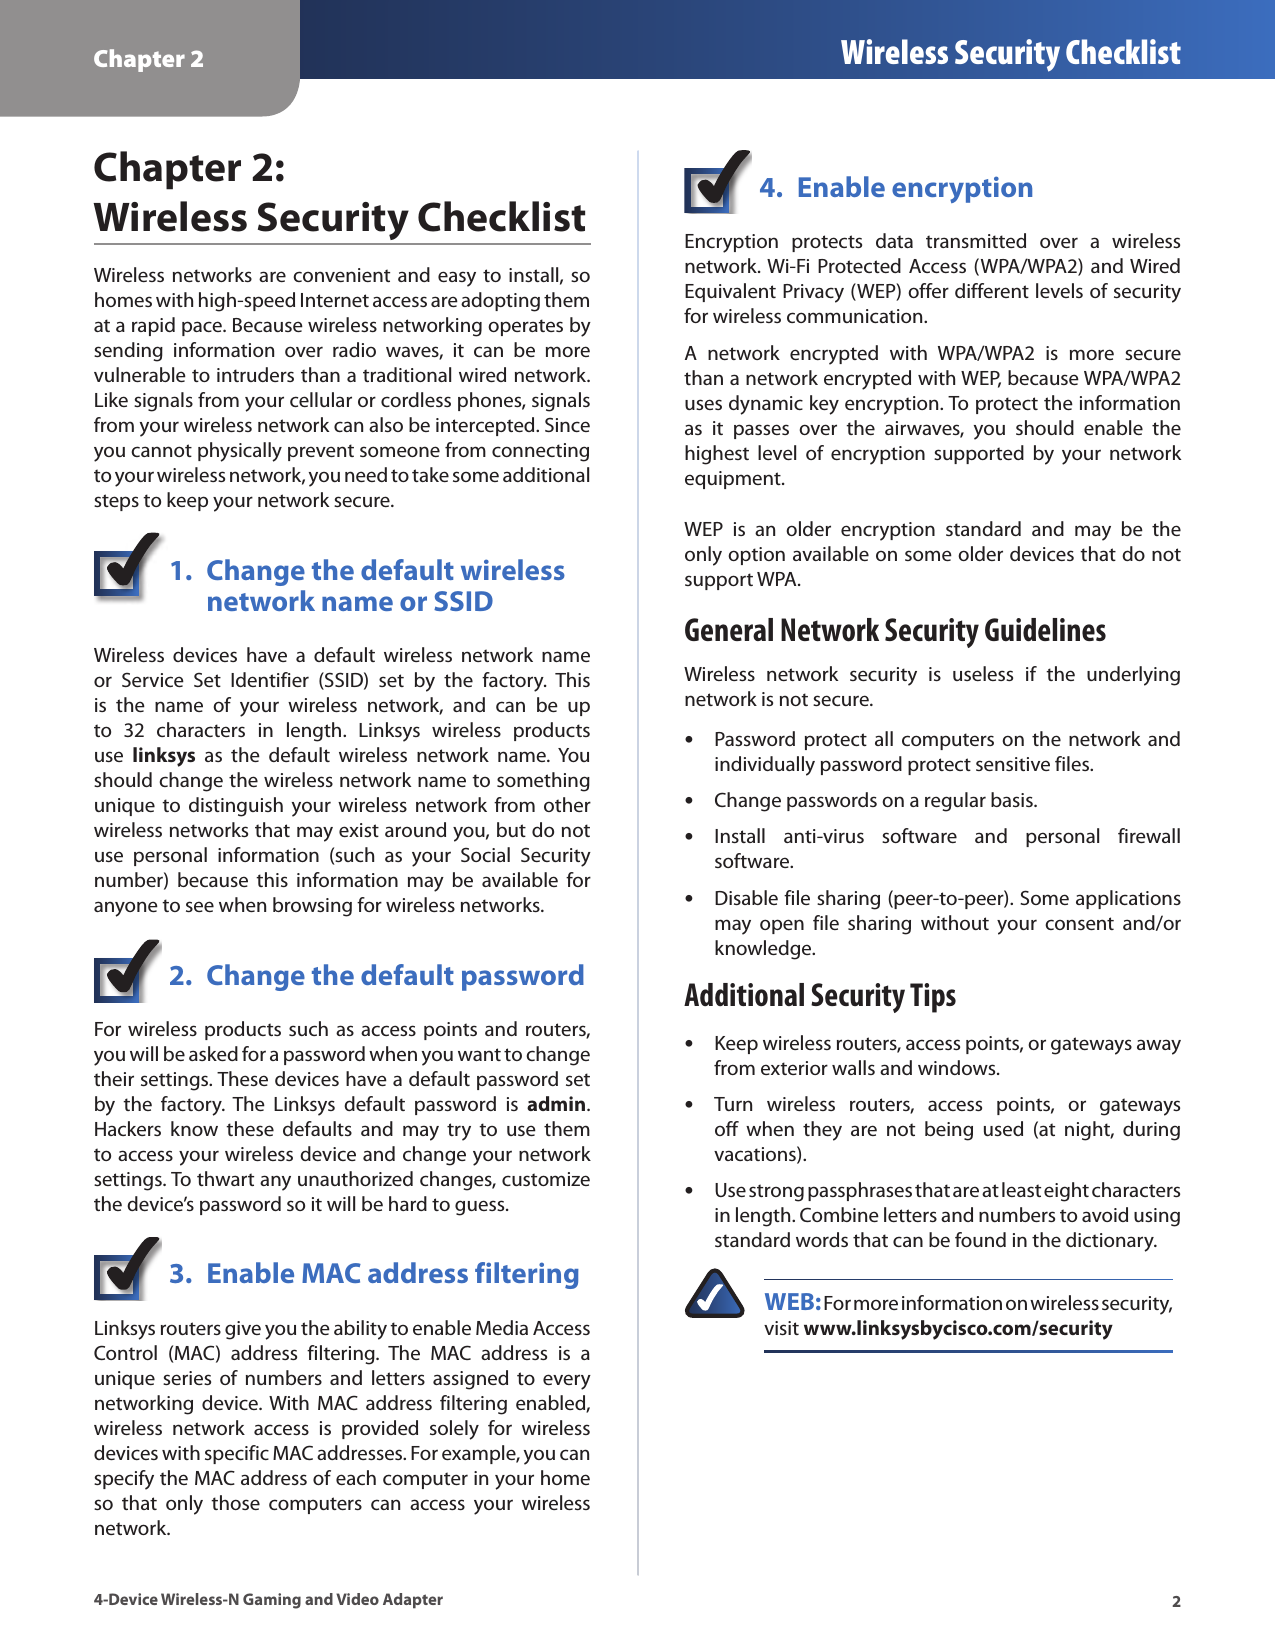 Chapter 2 Wireless Security Checklist24-Device Wireless-N Gaming and Video AdapterChapter 2:  Wireless Security ChecklistWireless  networks are convenient  and  easy to install, so homes with high-speed Internet access are adopting them at a rapid pace. Because wireless networking operates by sending  information  over  radio  waves,  it  can  be  more vulnerable to intruders than a traditional wired network. Like signals from your cellular or cordless phones, signals from your wireless network can also be intercepted. Since you cannot physically prevent someone from connecting to your wireless network, you need to take some additional steps to keep your network secure. 1.  Change the default wireless    network name or SSIDWireless  devices  have  a  default  wireless  network  name or  Service  Set  Identifier  (SSID)  set  by  the  factory.  This is  the  name  of  your  wireless  network,  and  can  be  up to  32  characters  in  length.  Linksys  wireless  products use  linksys  as  the  default  wireless  network  name.  You should change the wireless network name to something unique  to distinguish  your wireless  network from  other wireless networks that may exist around you, but do not use  personal  information  (such  as  your  Social  Security number)  because  this  information  may  be  available  for anyone to see when browsing for wireless networks. 2.  Change the default passwordFor wireless products such as access points and  routers, you will be asked for a password when you want to change their settings. These devices have a default password set by  the  factory.  The  Linksys  default  password  is  admin. Hackers  know  these  defaults  and  may  try  to  use  them to access your wireless device and change your network settings. To thwart any unauthorized changes, customize the device’s password so it will be hard to guess.3.  Enable MAC address filteringLinksys routers give you the ability to enable Media Access Control  (MAC)  address  filtering.  The  MAC  address  is  a unique  series  of  numbers and  letters  assigned  to every networking  device. With  MAC  address filtering  enabled, wireless  network  access  is  provided  solely  for  wireless devices with specific MAC addresses. For example, you can specify the MAC address of each computer in your home so  that  only  those  computers  can  access  your  wireless network. 4.  Enable encryptionEncryption  protects  data  transmitted  over  a  wireless network. Wi-Fi Protected  Access (WPA/WPA2)  and Wired Equivalent Privacy (WEP) offer different levels of security for wireless communication.A  network  encrypted  with  WPA/WPA2  is  more  secure than a network encrypted with WEP, because WPA/WPA2 uses dynamic key encryption. To protect the information as  it  passes  over  the  airwaves,  you  should  enable  the highest  level  of  encryption  supported  by  your  network equipment. WEP  is  an  older  encryption  standard  and  may  be  the only option available on some older devices that do not support WPA.General Network Security GuidelinesWireless  network  security  is  useless  if  the  underlying network is not secure.  •Password protect  all computers on  the network  and individually password protect sensitive files. •Change passwords on a regular basis. •Install  anti-virus  software  and  personal  firewall software. •Disable file sharing (peer-to-peer). Some applications may  open  file  sharing  without  your  consent  and/or knowledge.Additional Security Tips •Keep wireless routers, access points, or gateways away from exterior walls and windows. •Turn  wireless  routers,  access  points,  or  gateways off  when  they  are  not  being  used  (at  night,  during vacations). •Use strong passphrases that are at least eight characters in length. Combine letters and numbers to avoid using standard words that can be found in the dictionary. WEB: For more information on wireless security, visit www.linksysbycisco.com/security